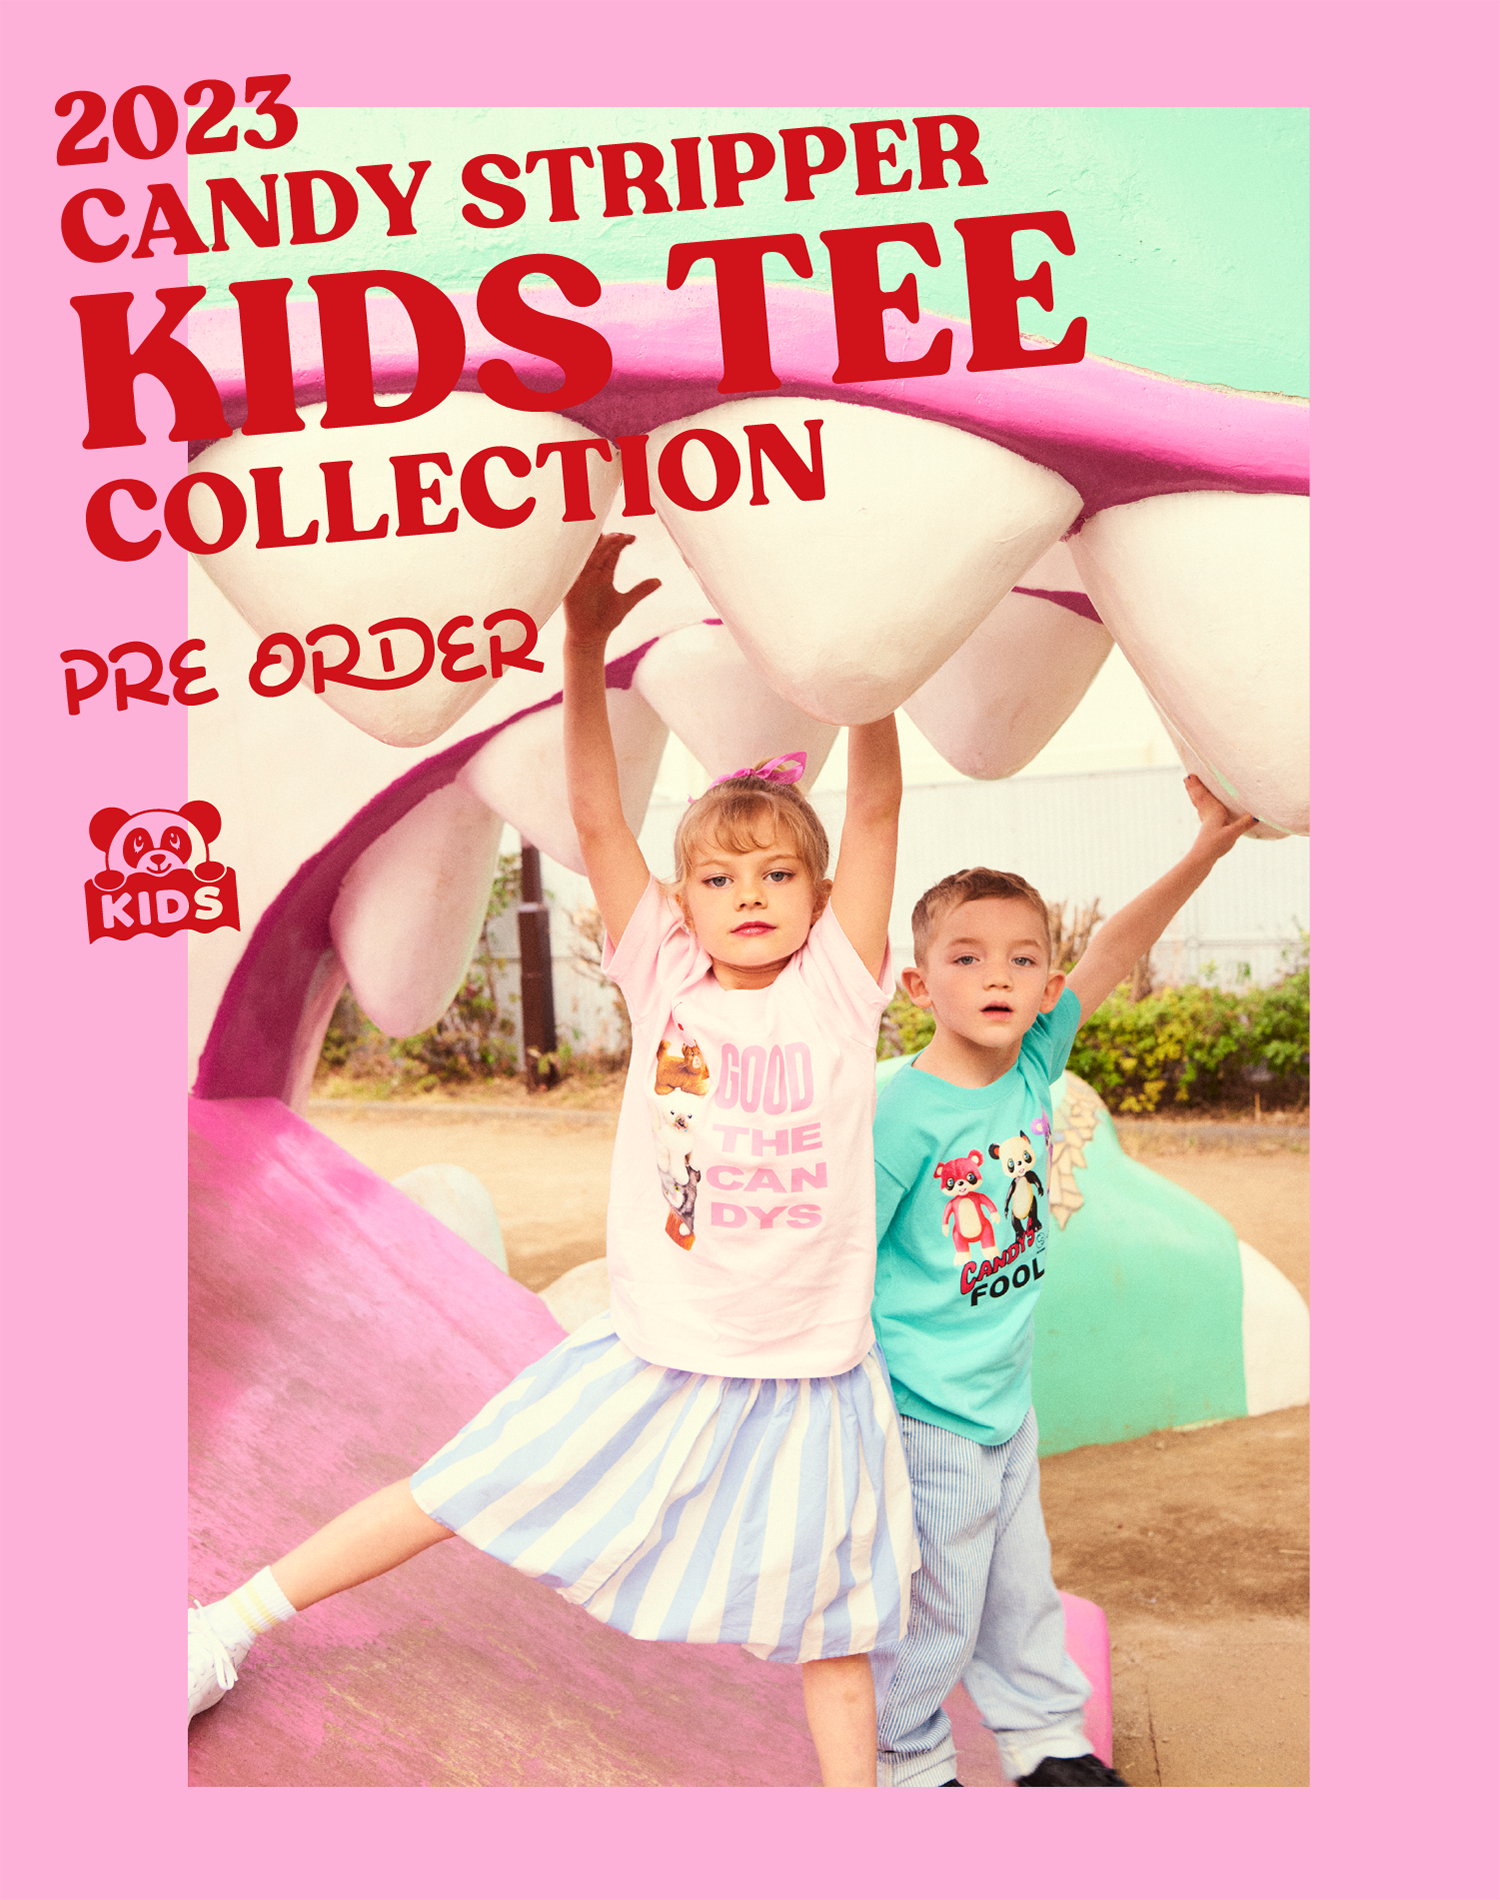 CANDYSTRIPPER KIDS TEE COLLECTION